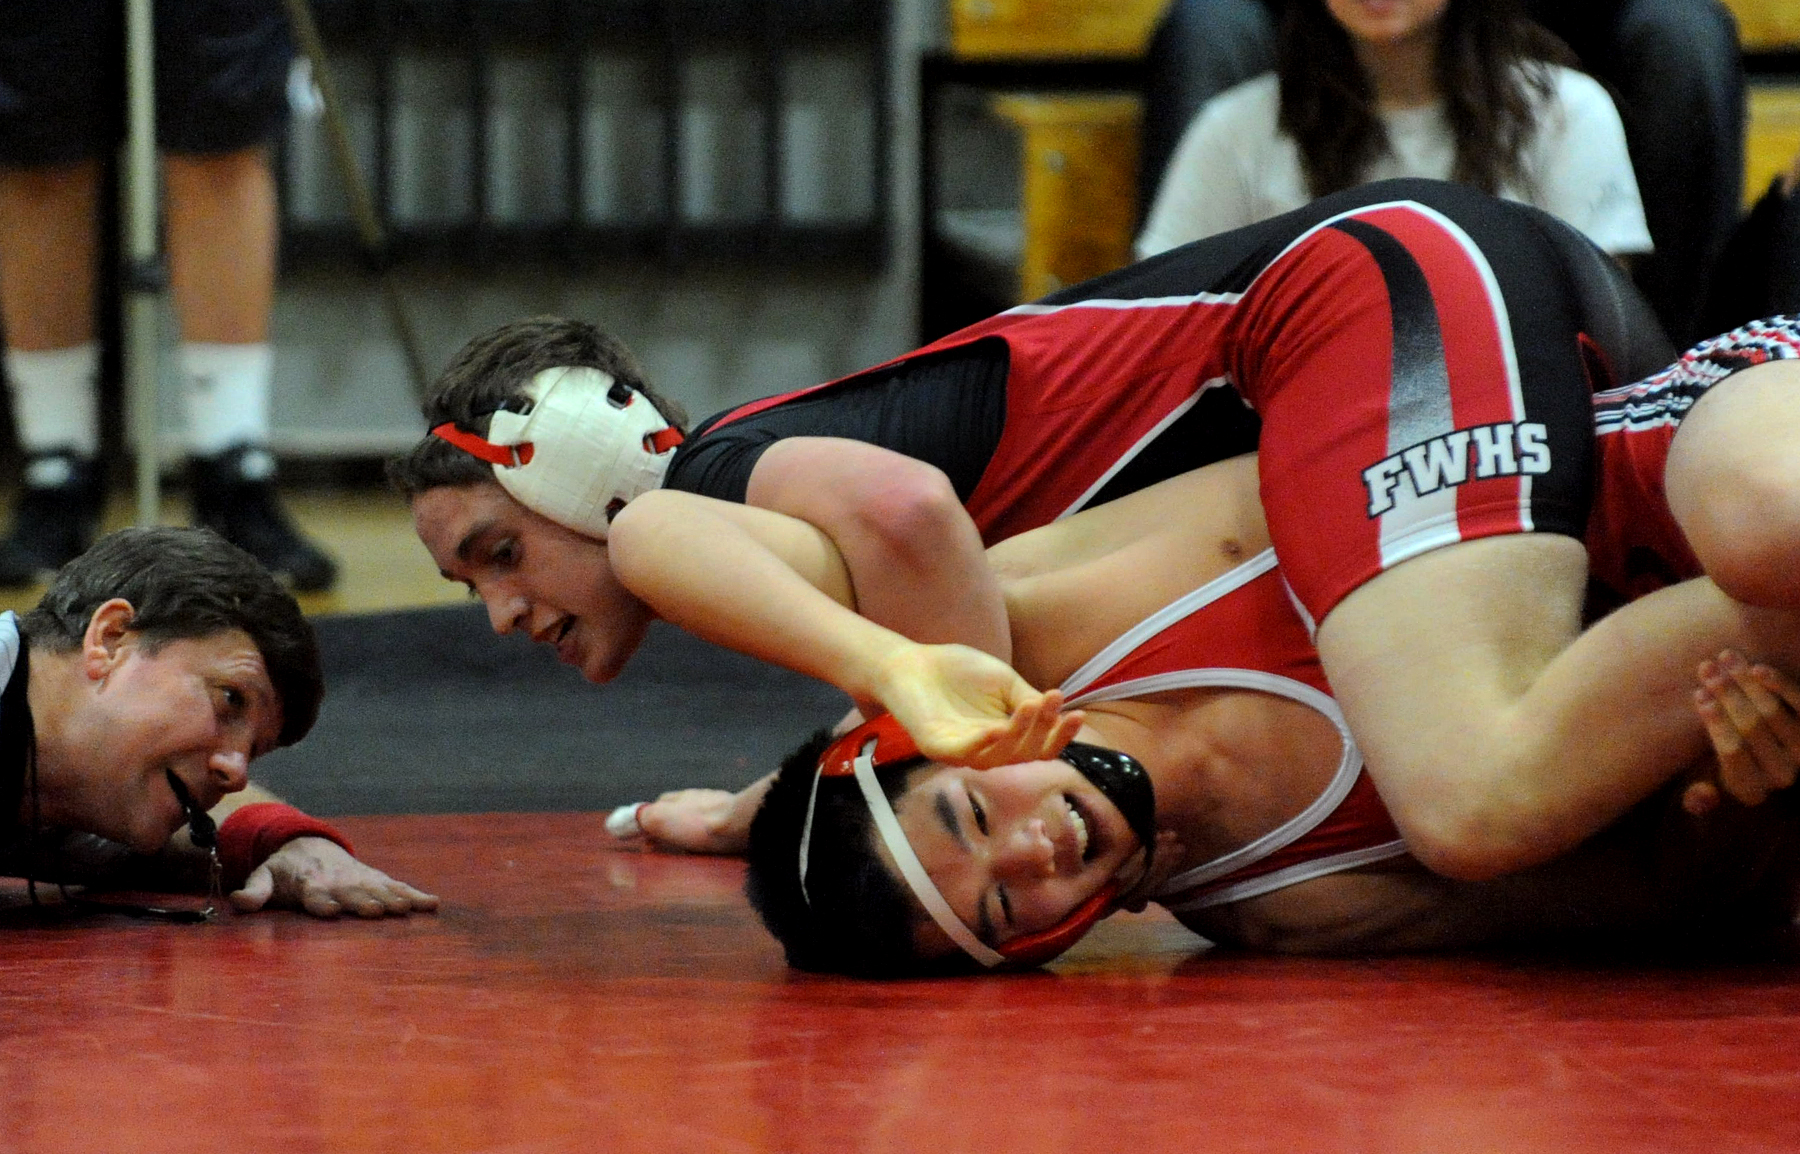 Anania, Warde have high hopes for wrestling season